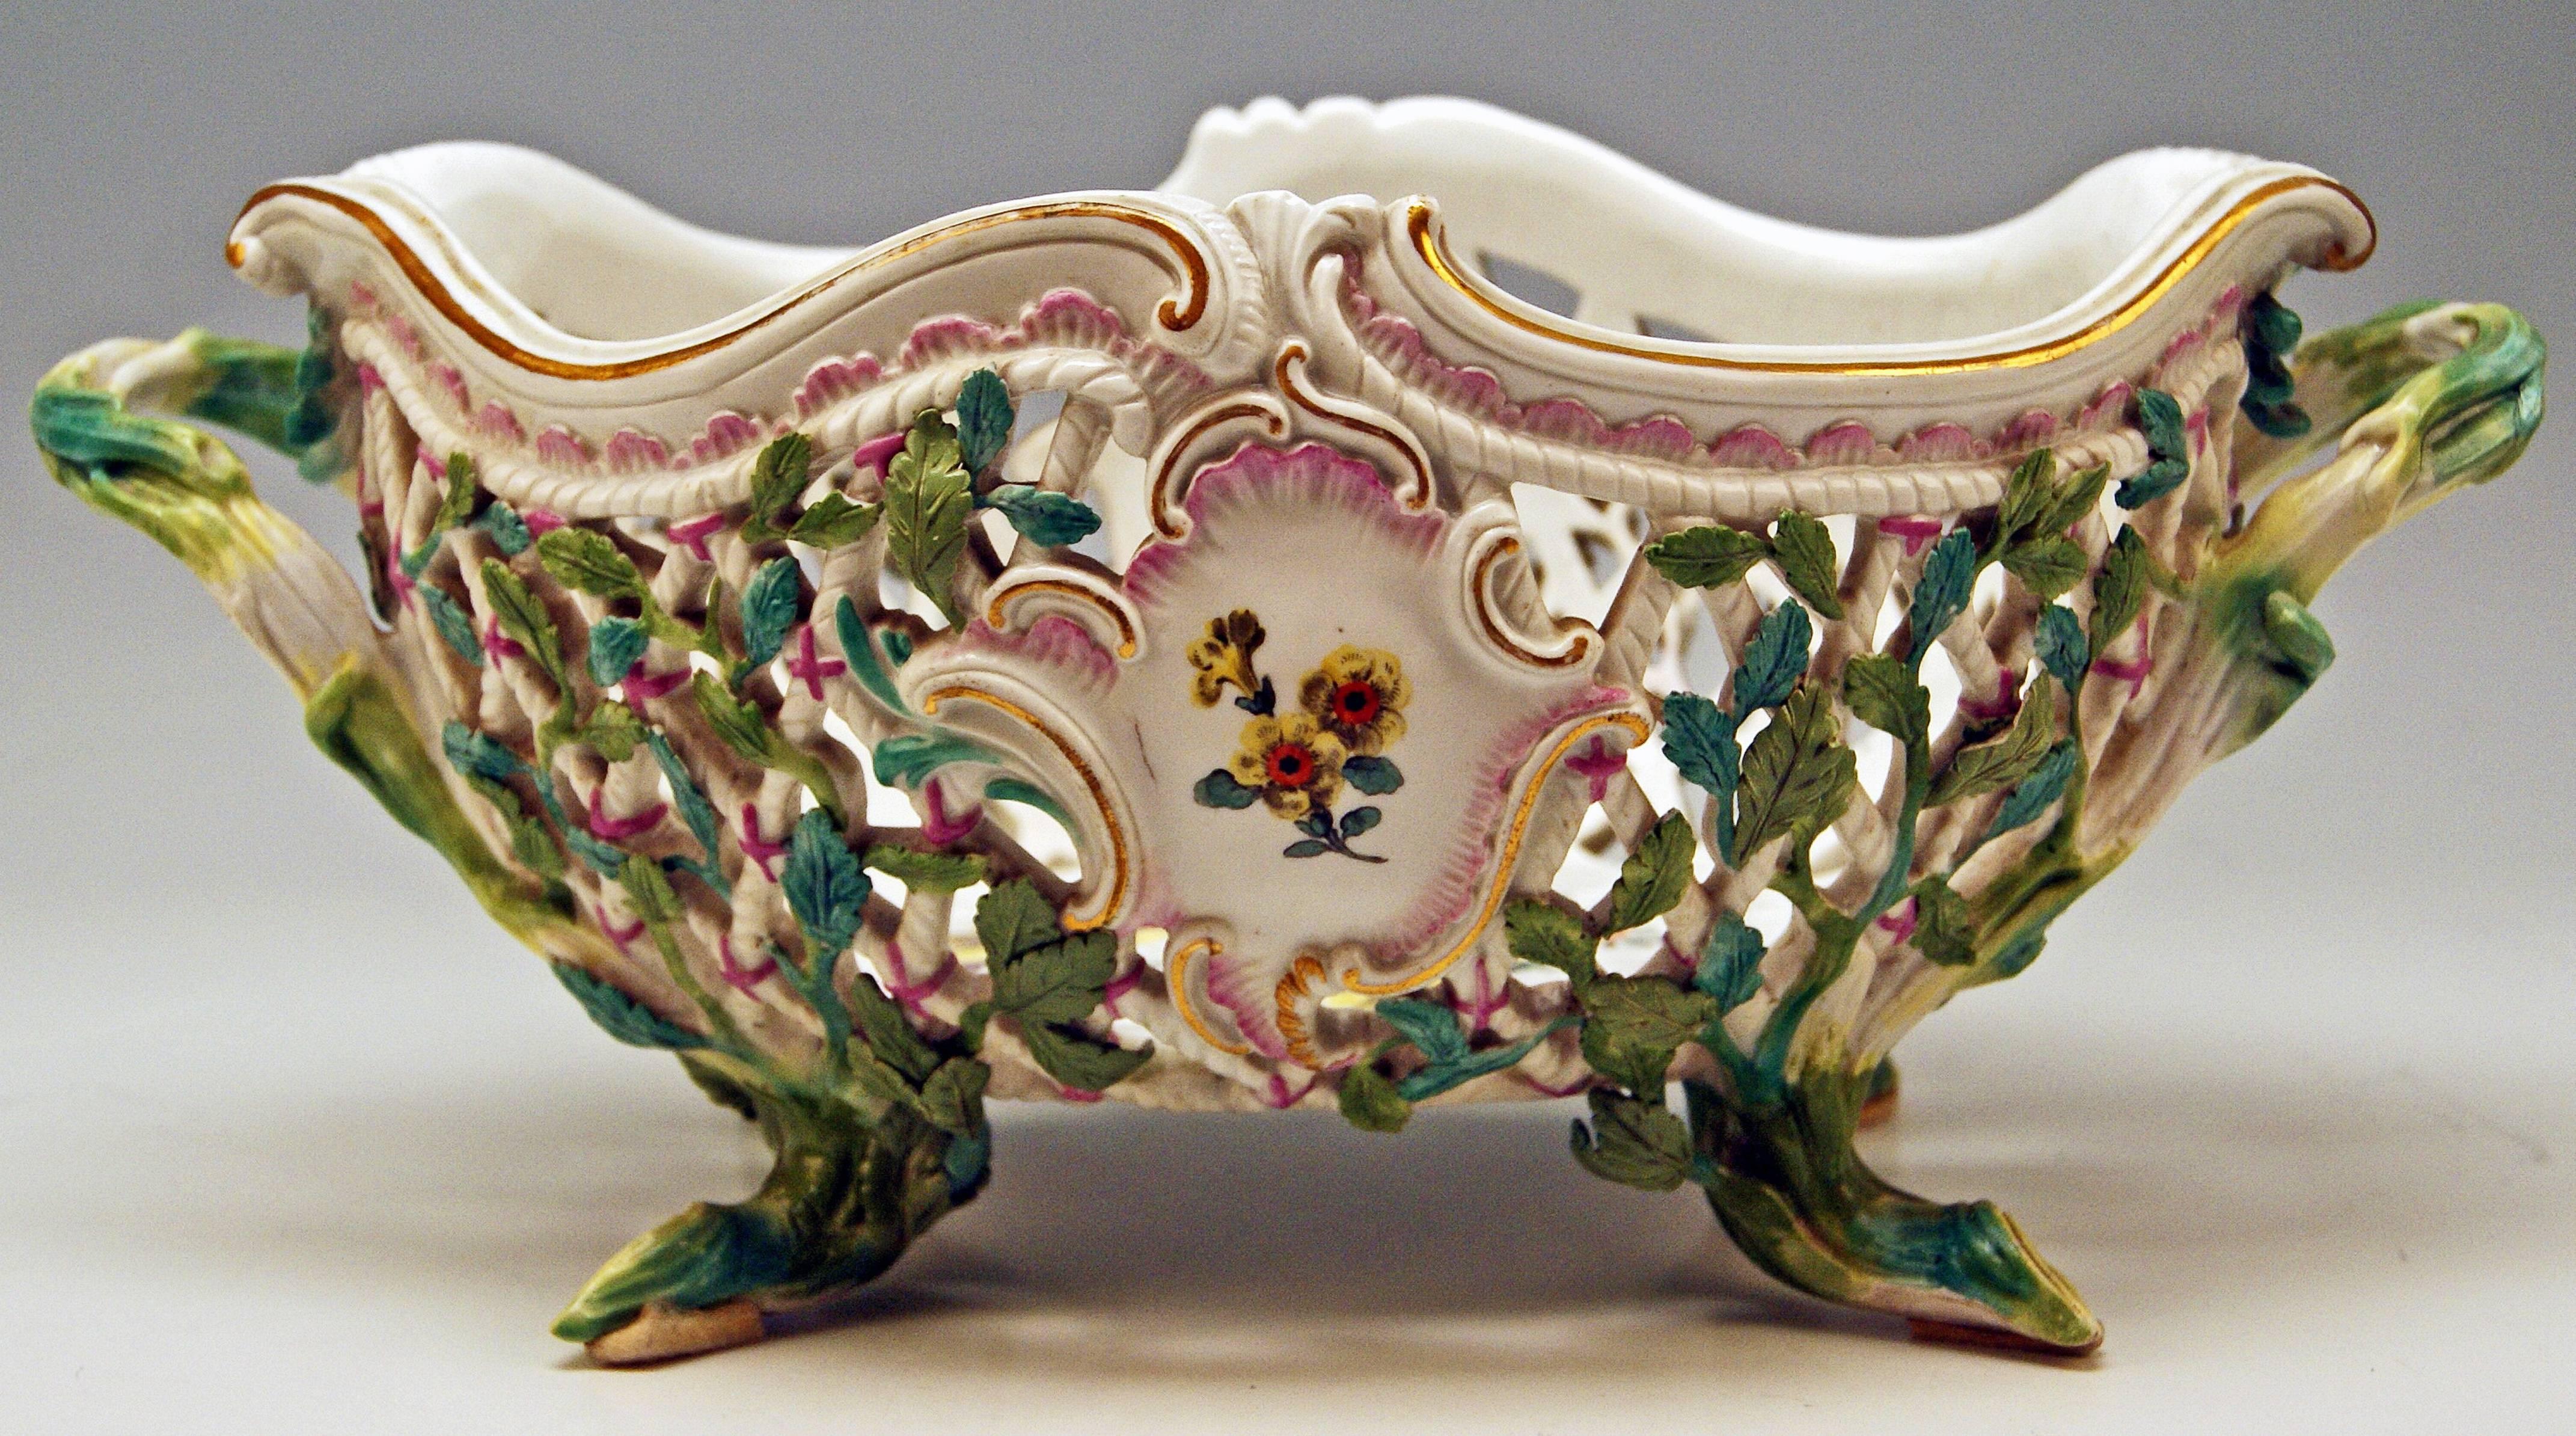 18th Century Meissen Rococo Large Oval Reticulated Basket Bowl with Flowers, circa 1763-1773